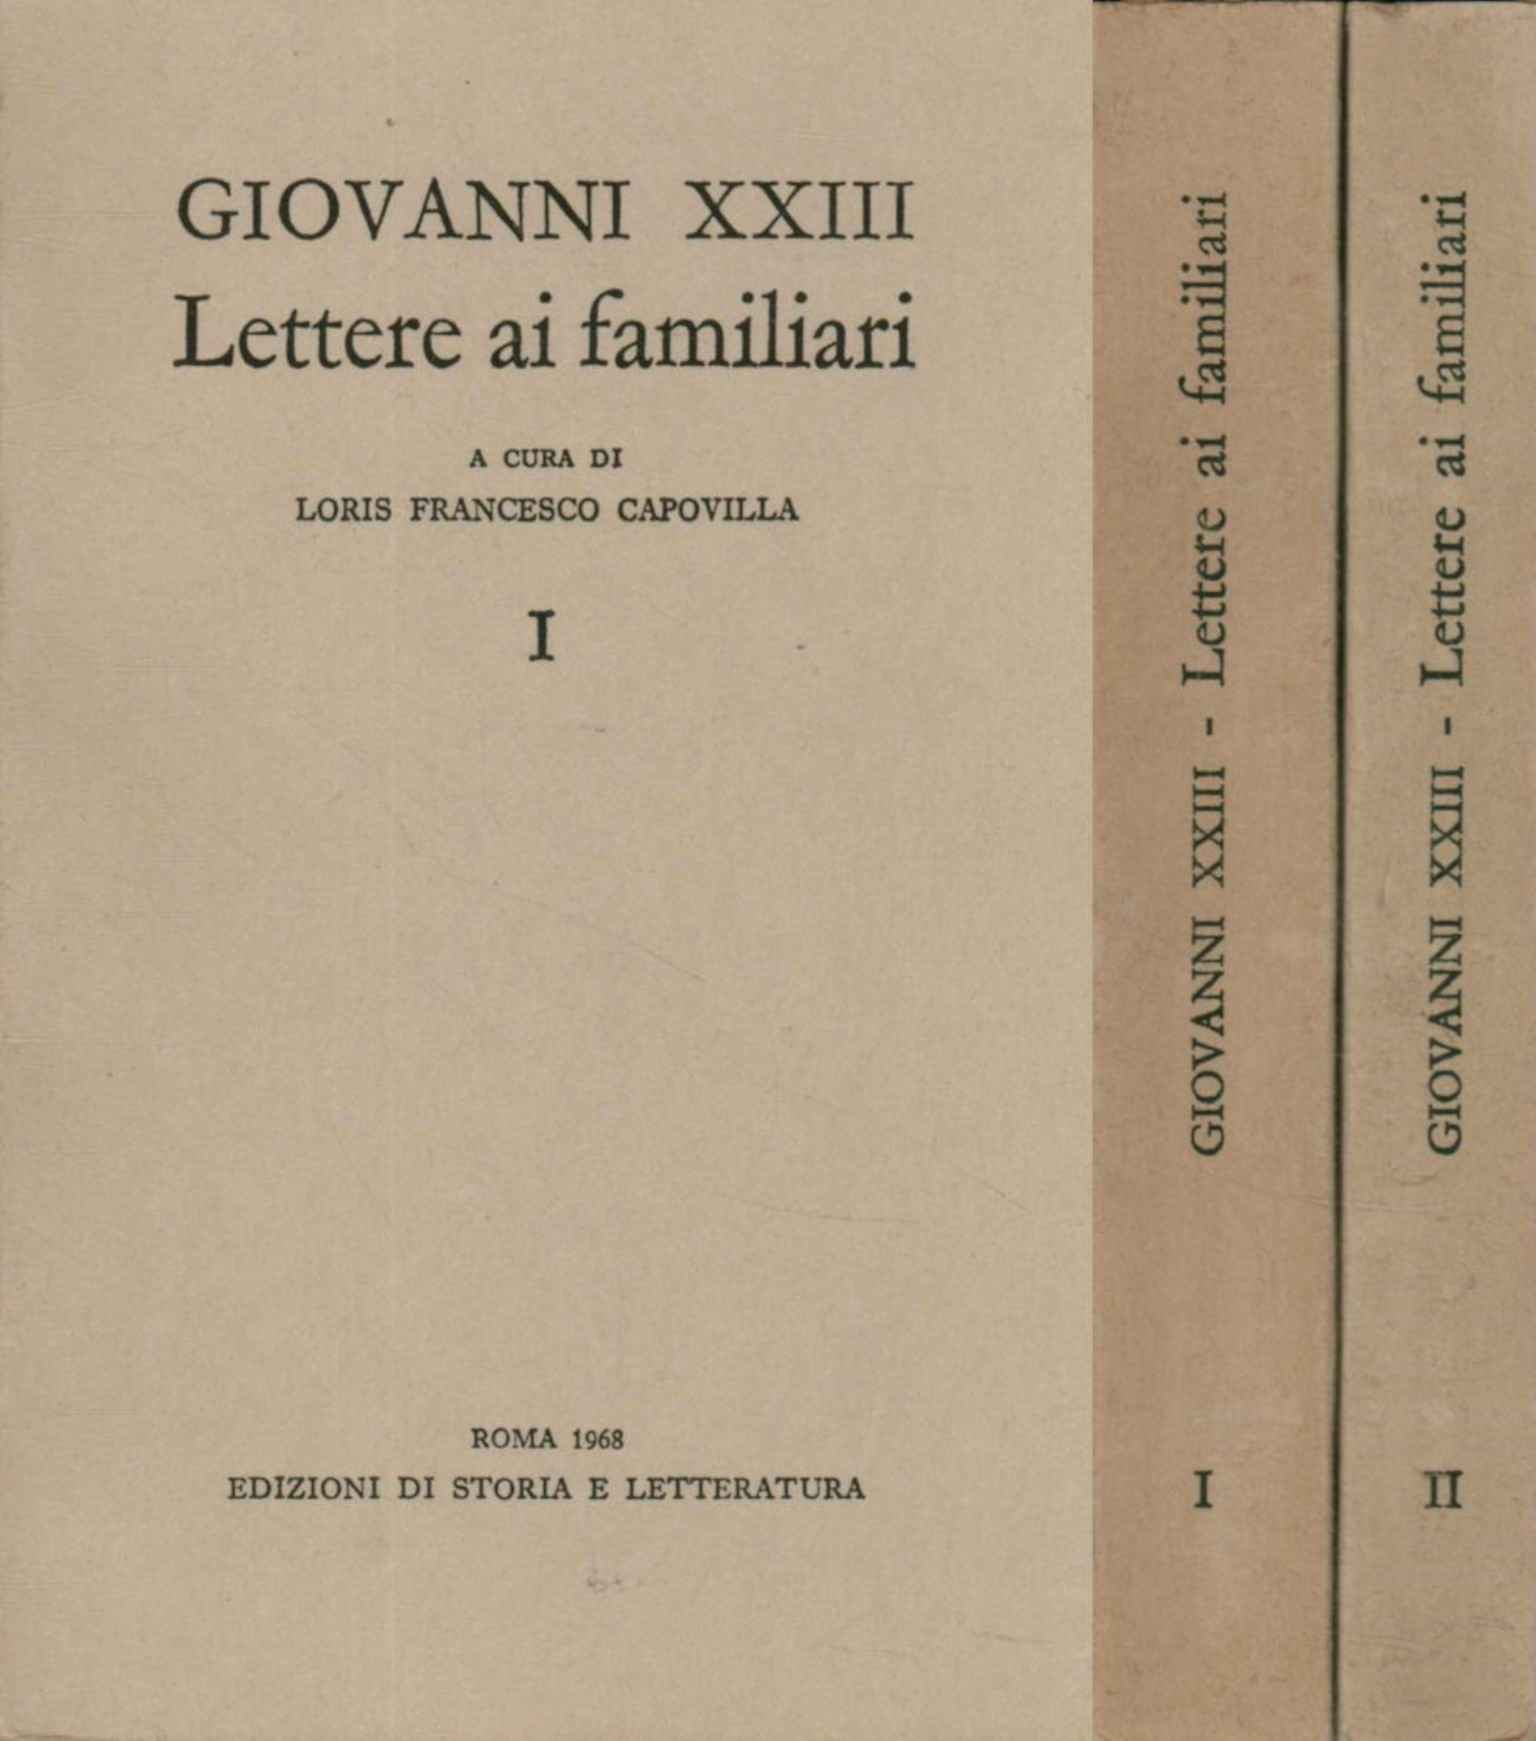 Letters to family members (2 Vol.)